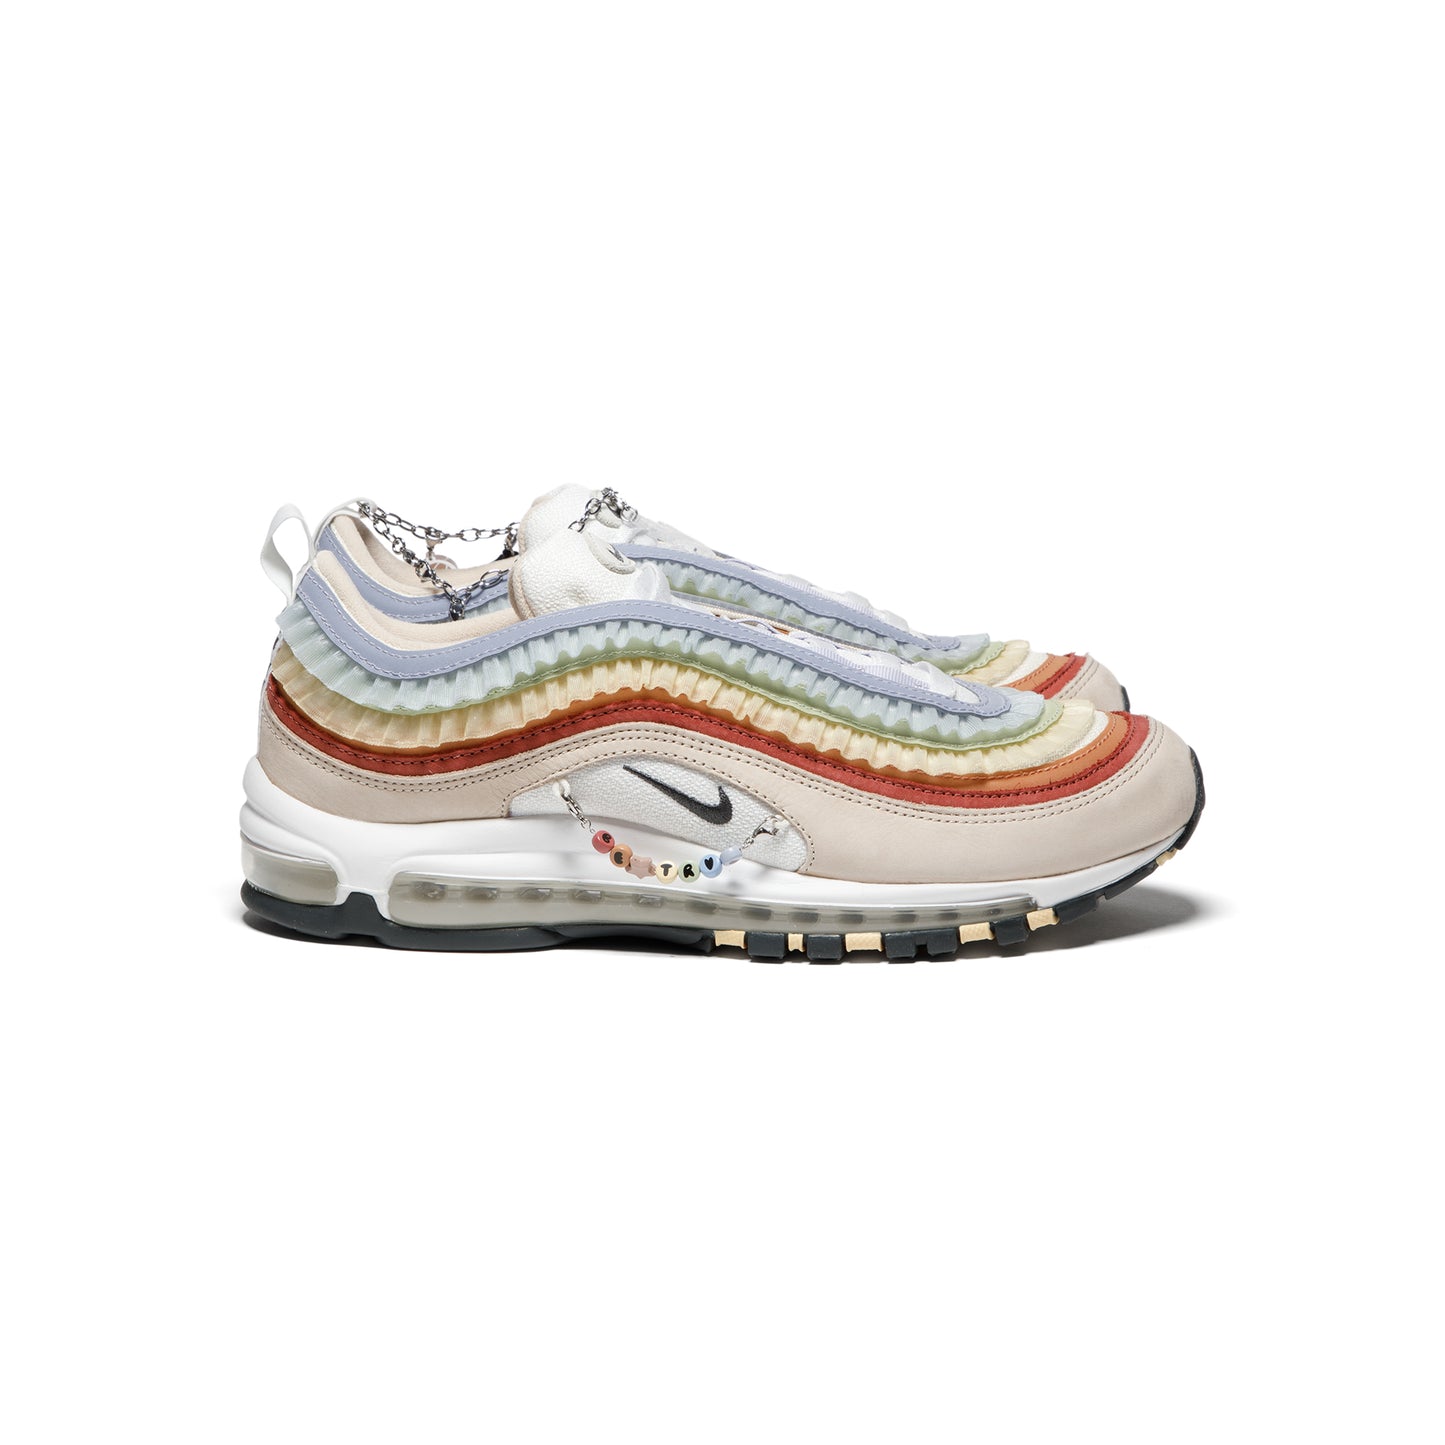 Nike Air Max 97 Be True (Pink Oxford/Anthracite/Adobe)